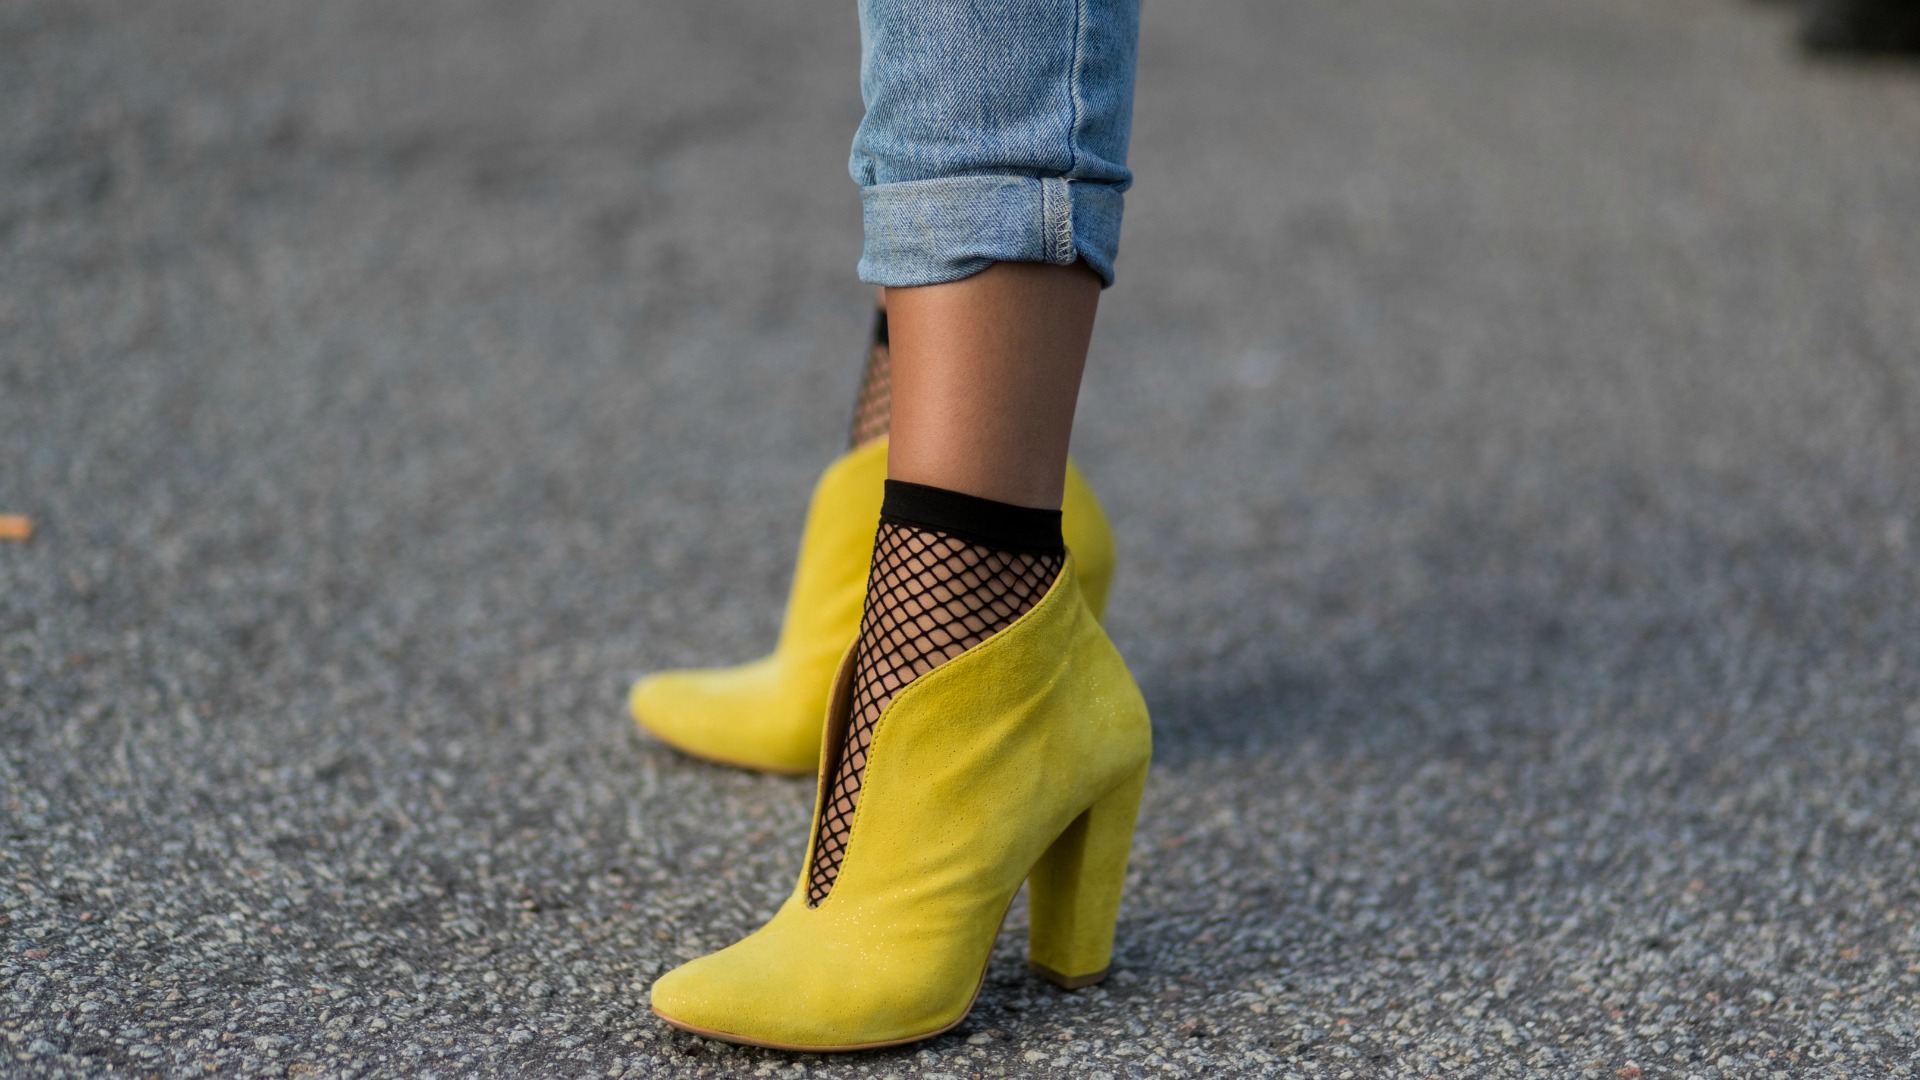 Your Stylish Look With Yellow Shoes Outfit